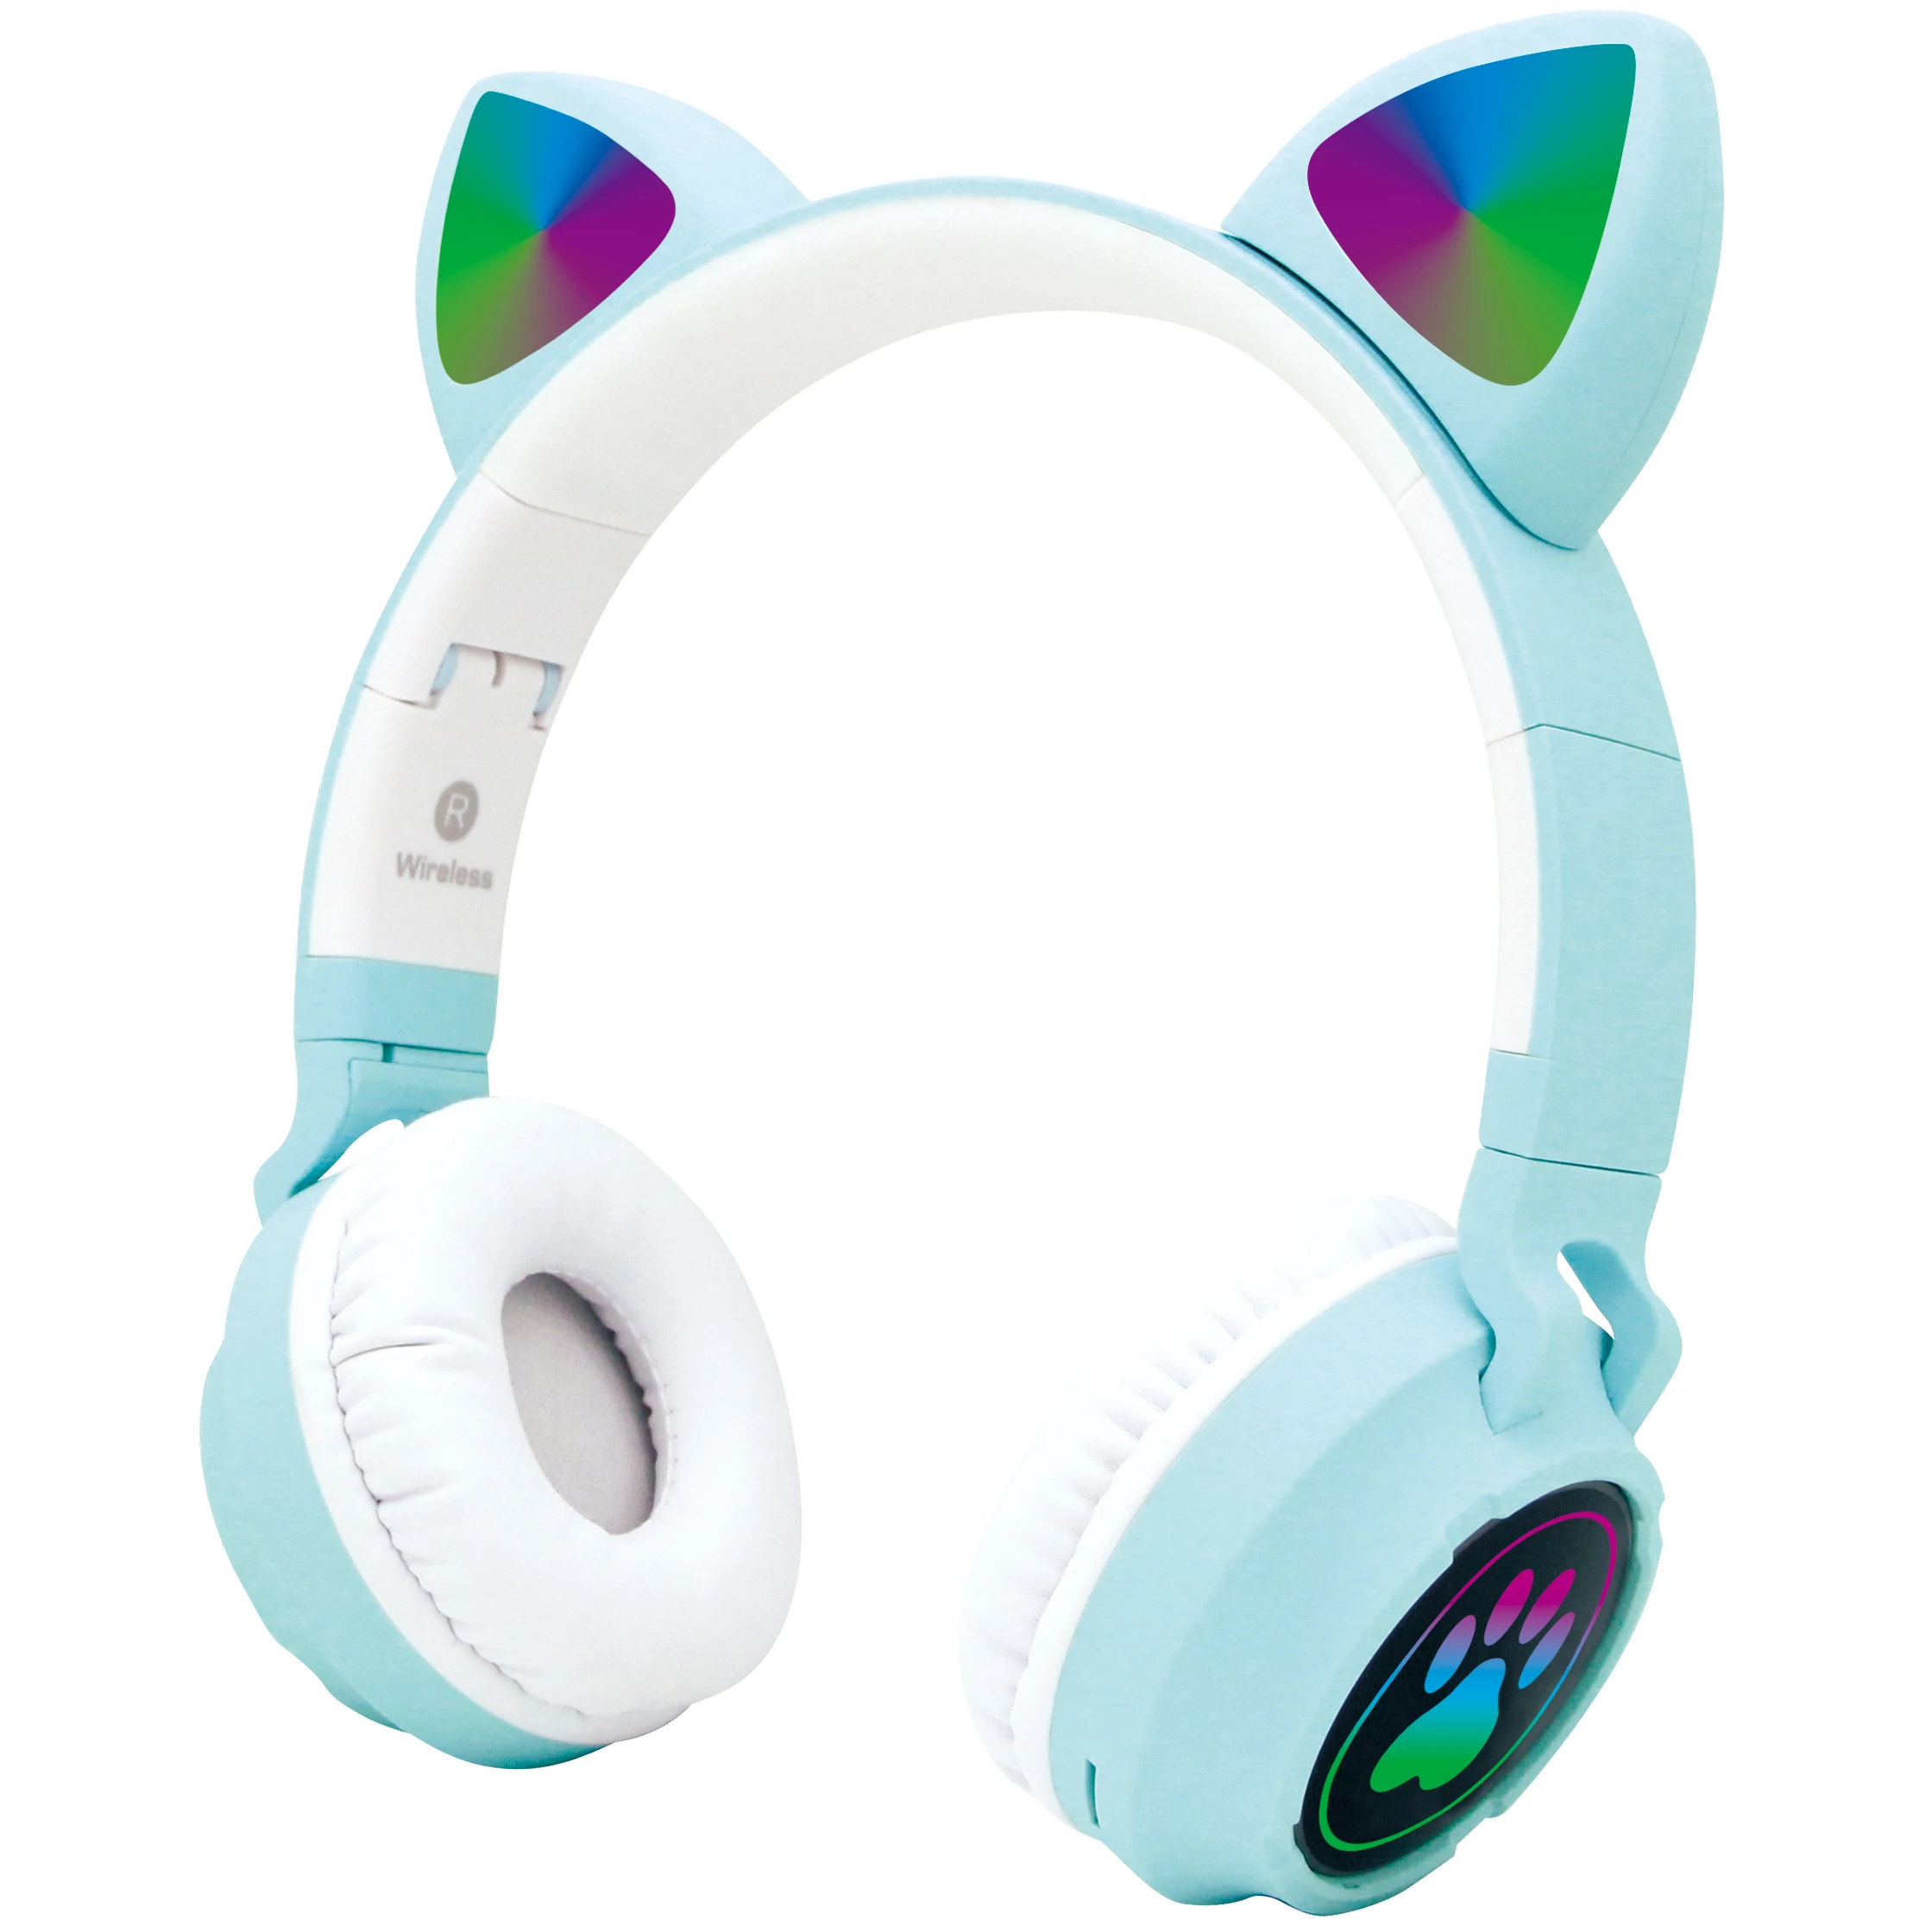 

Colorful Cat Wireless Ear Headphones Young People Kids Girls Headset Support SD Card 3.5mm Plug With Mic Children's Gift for Ps5, White purple black blue pink yellow green